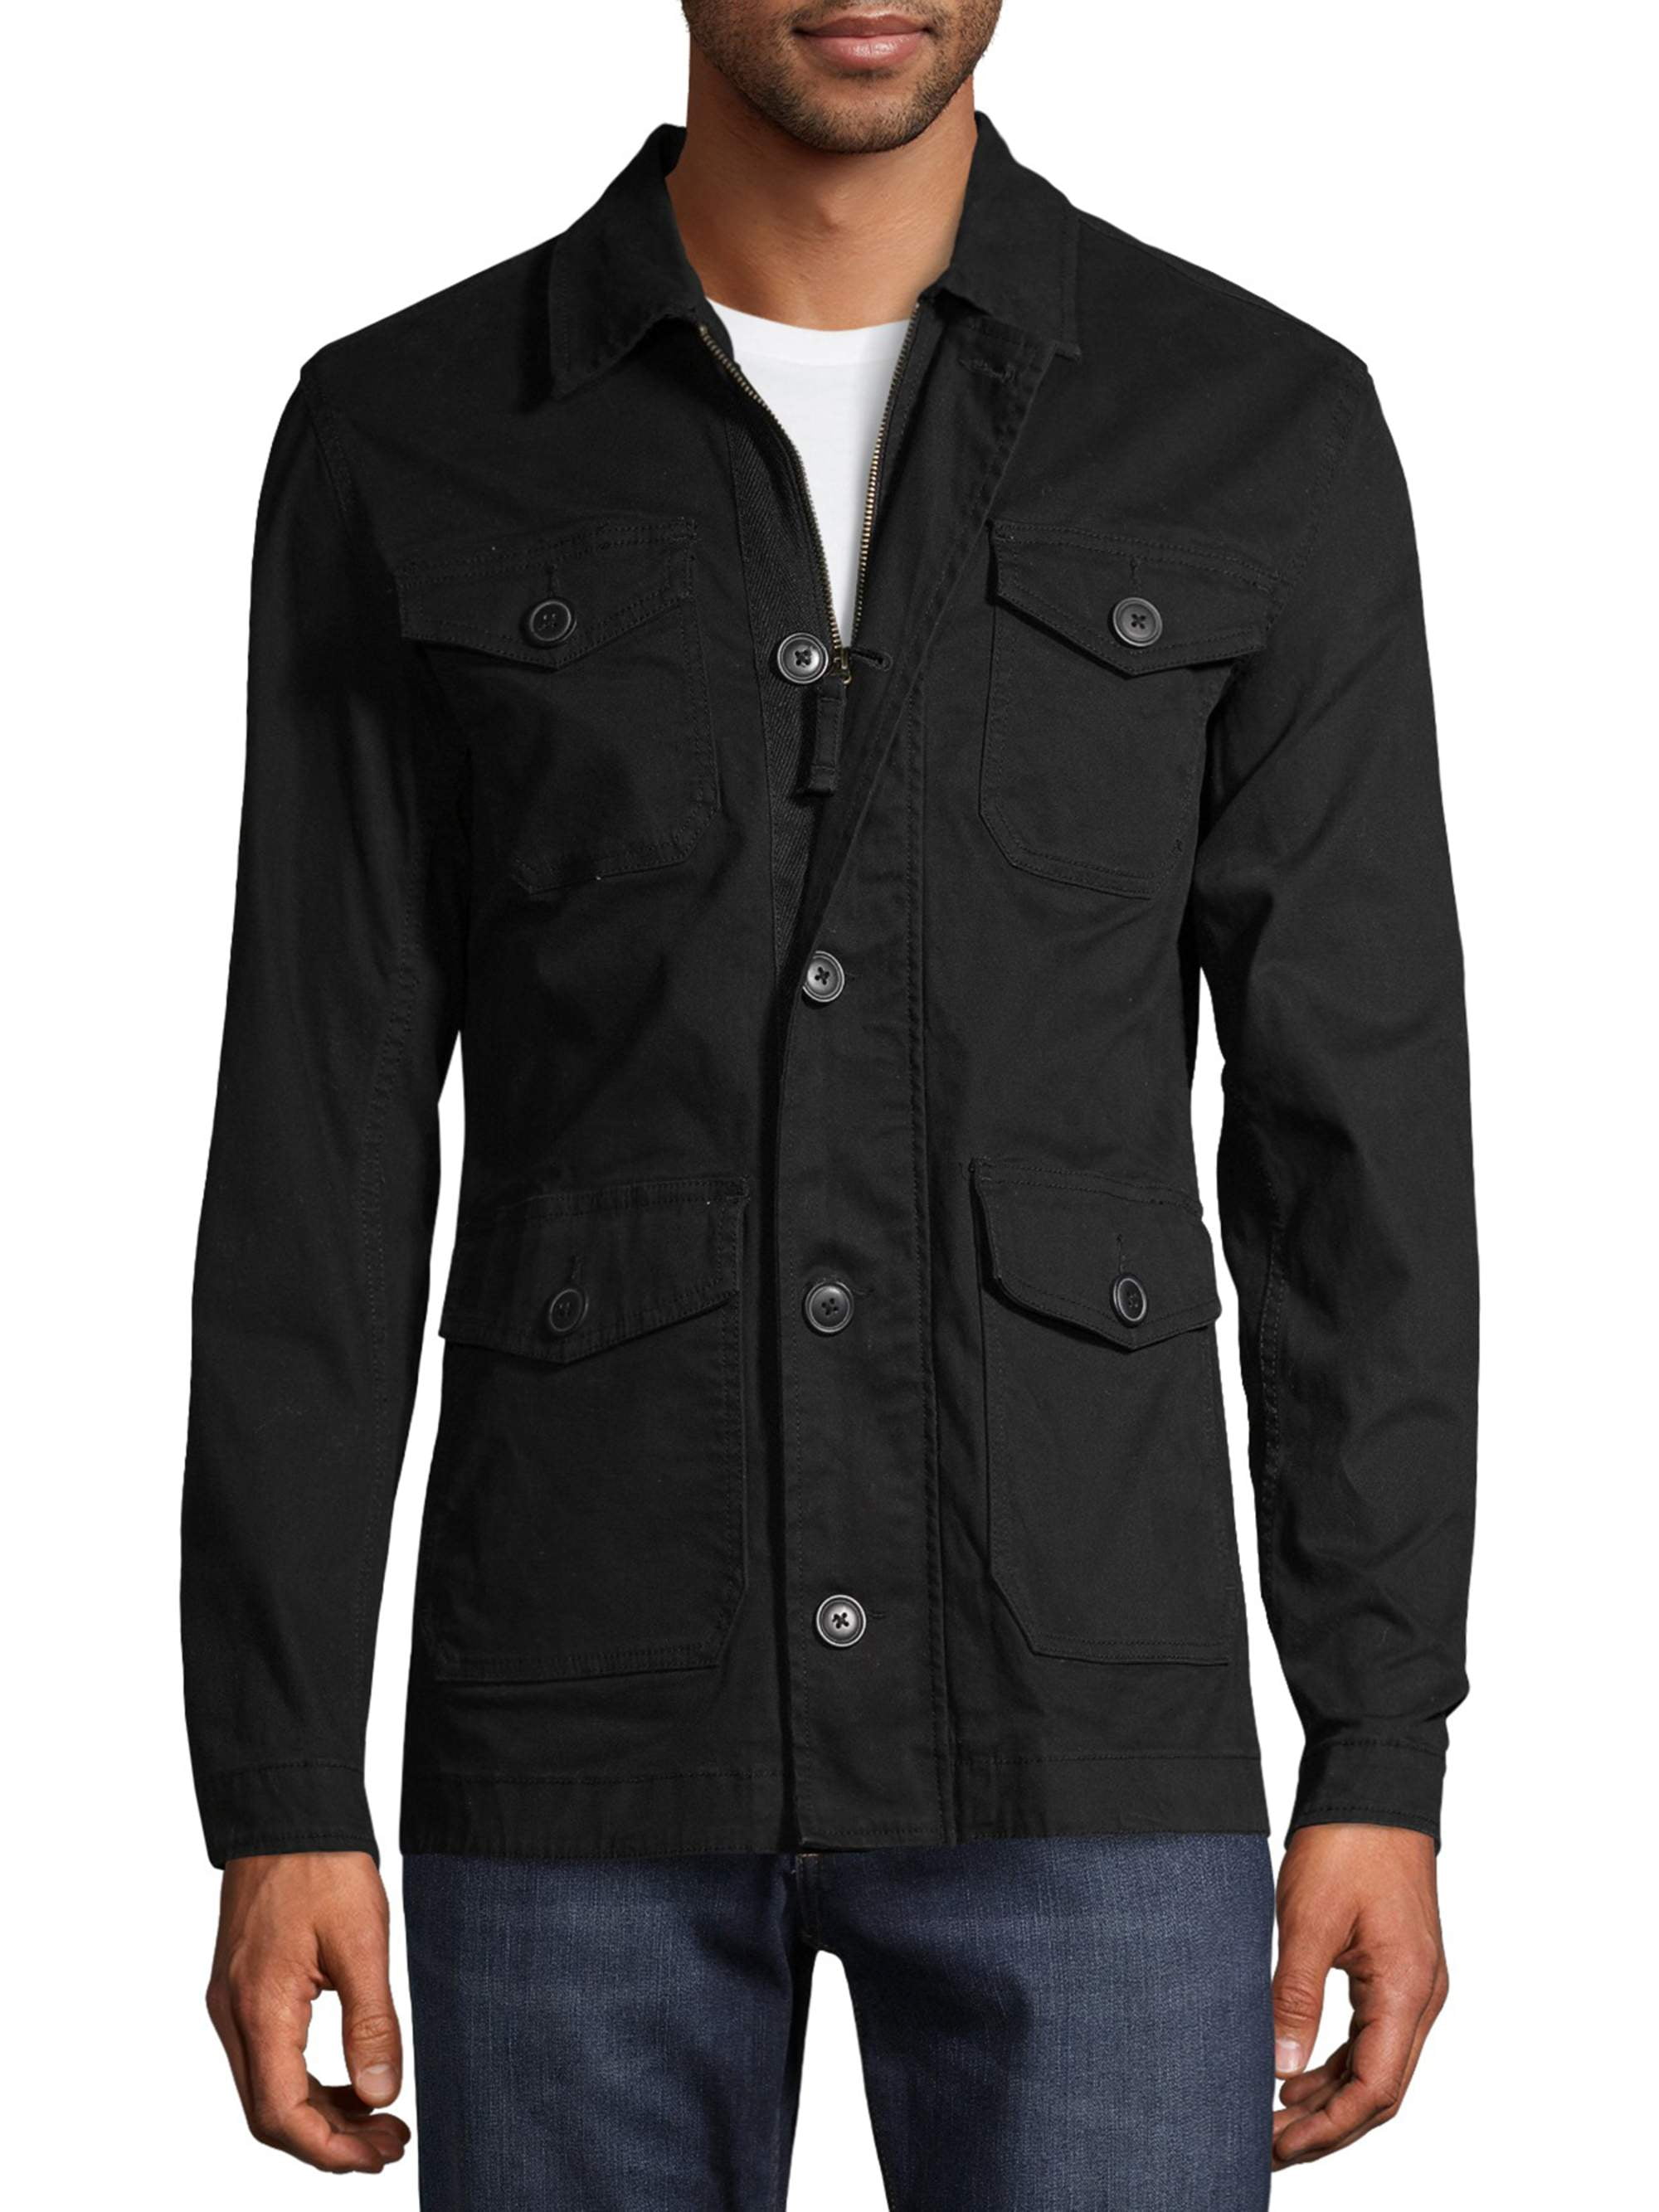 GEORGE - George Men's and Big Men's Field Jacket, up to Size 3XL ...